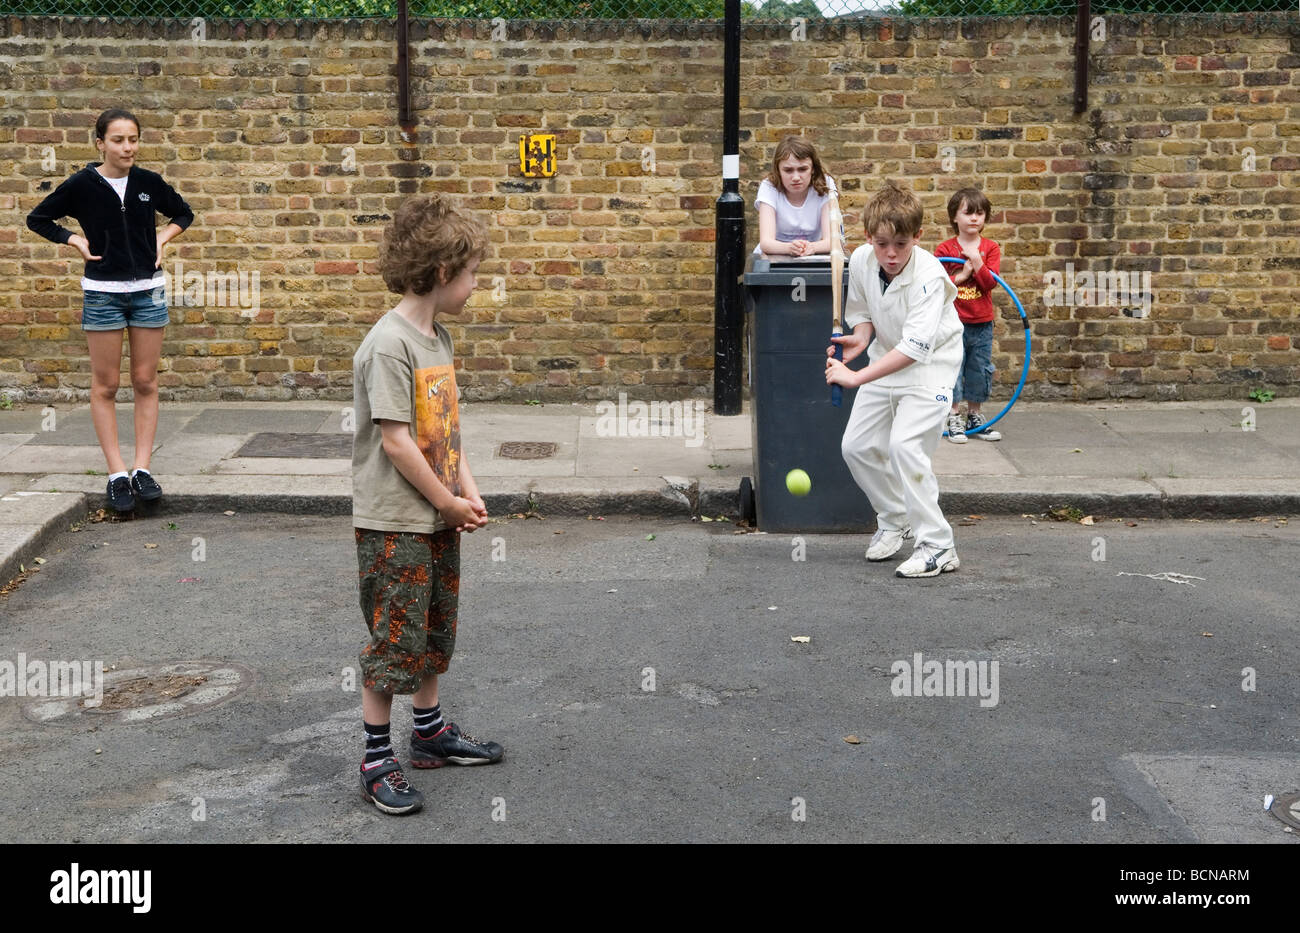 Children playing cricket in the street boy and girls. Brunswick Street Walthamstow London E17 Using the dustbin at the wicket. 2009 2000s HOMER SYKES Stock Photo